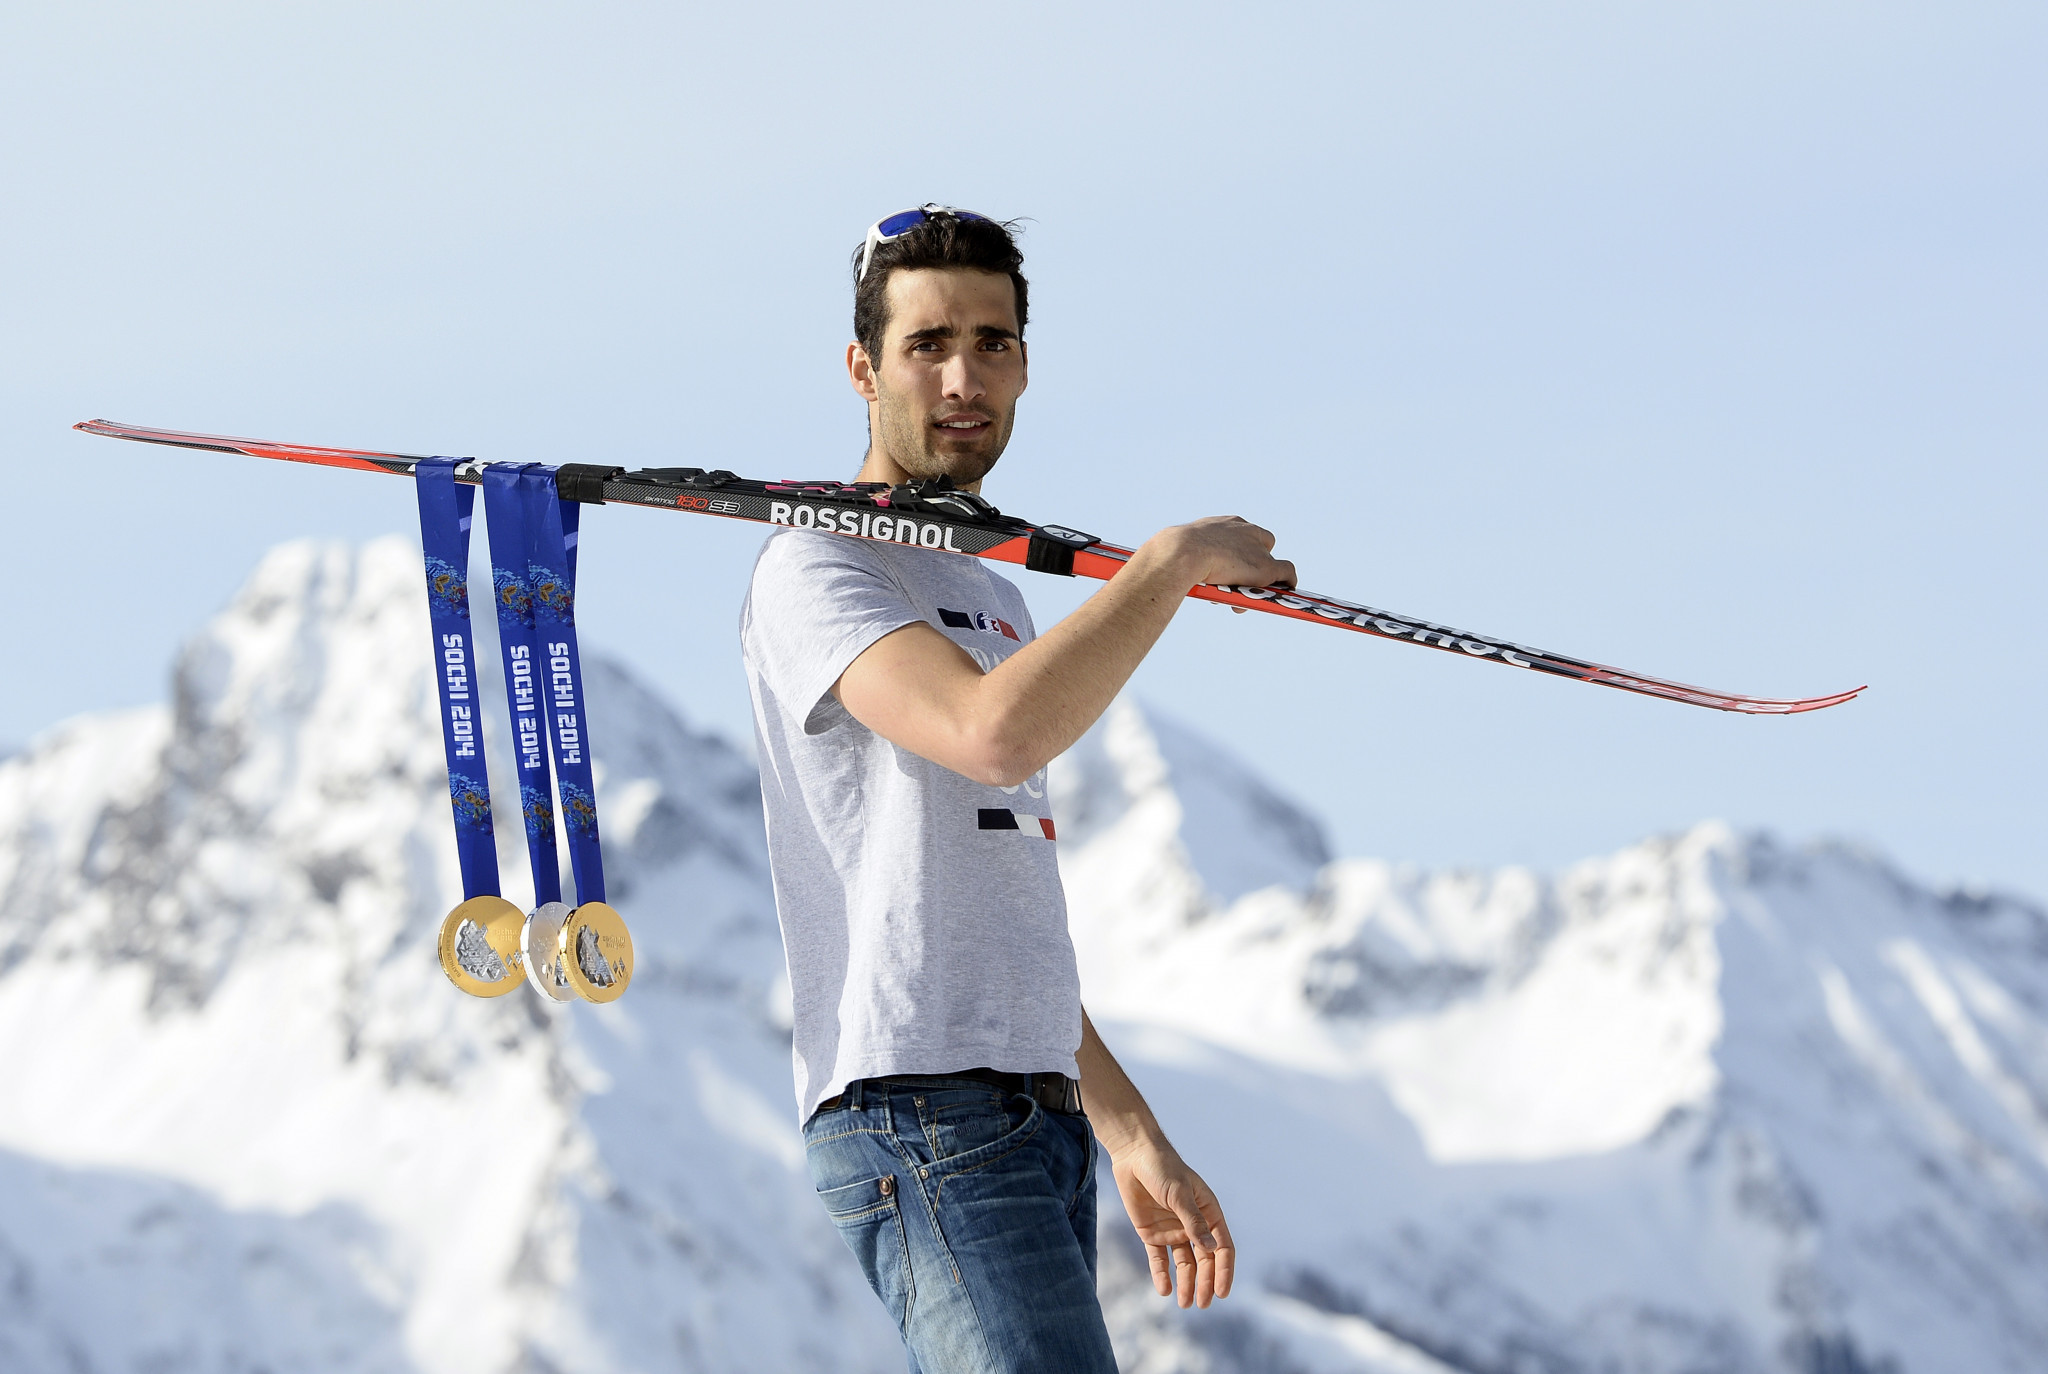 Martin Fourcade won three medals at Sochi 2014, including two golds ©Getty Images